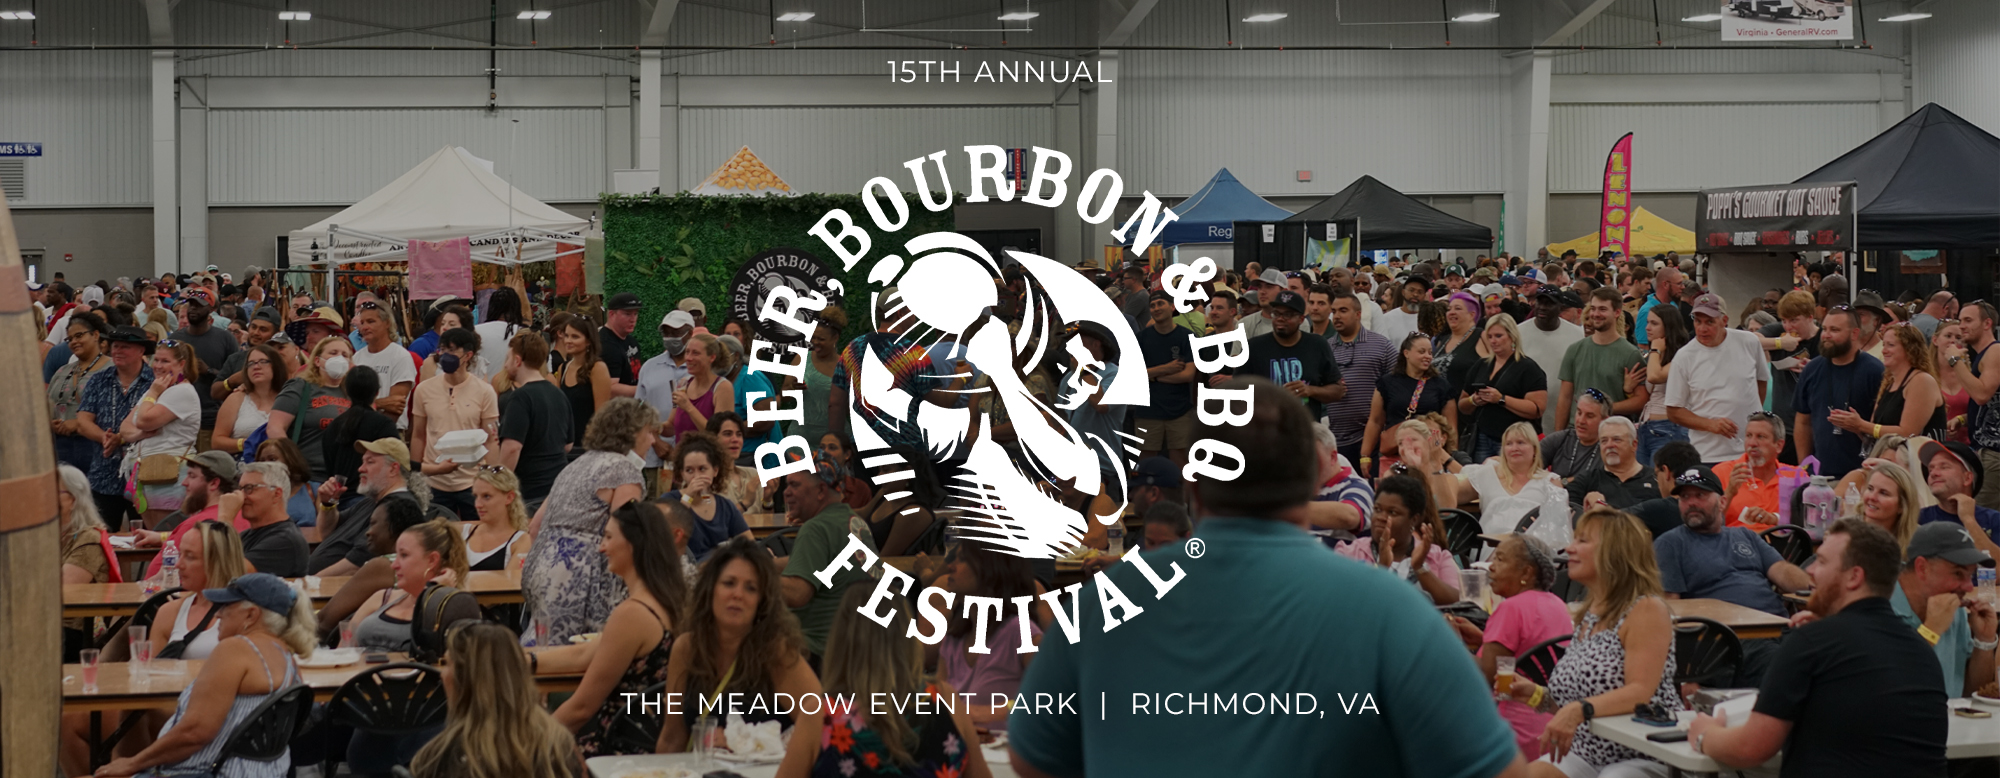 Beer, Bourbon and BBQ Festival - Richmond